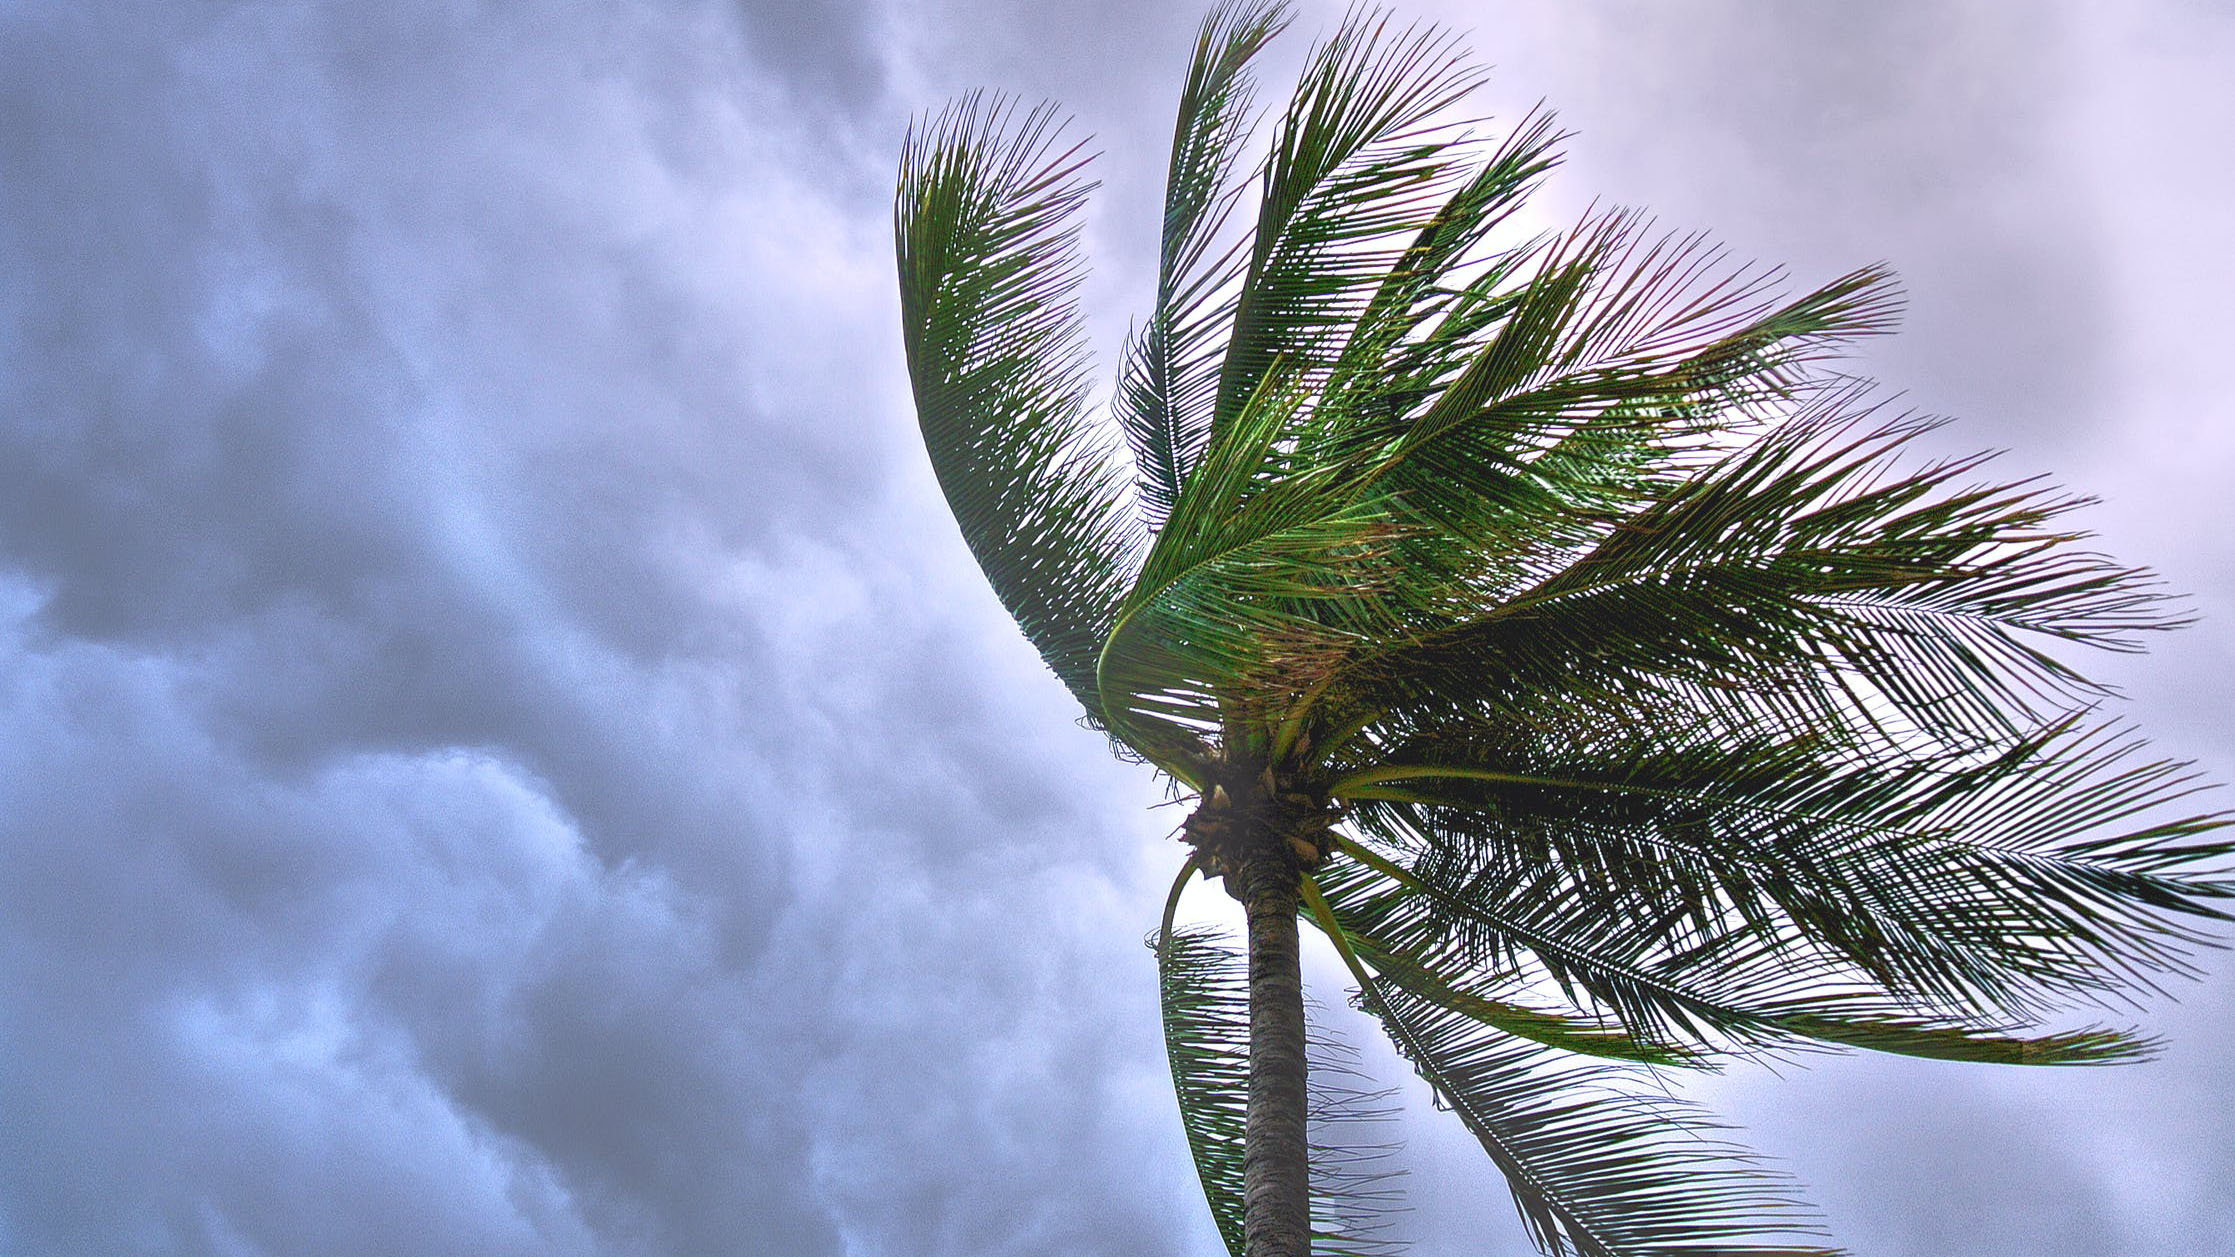 Coconut tree in front of dark clouds blowing in the wind